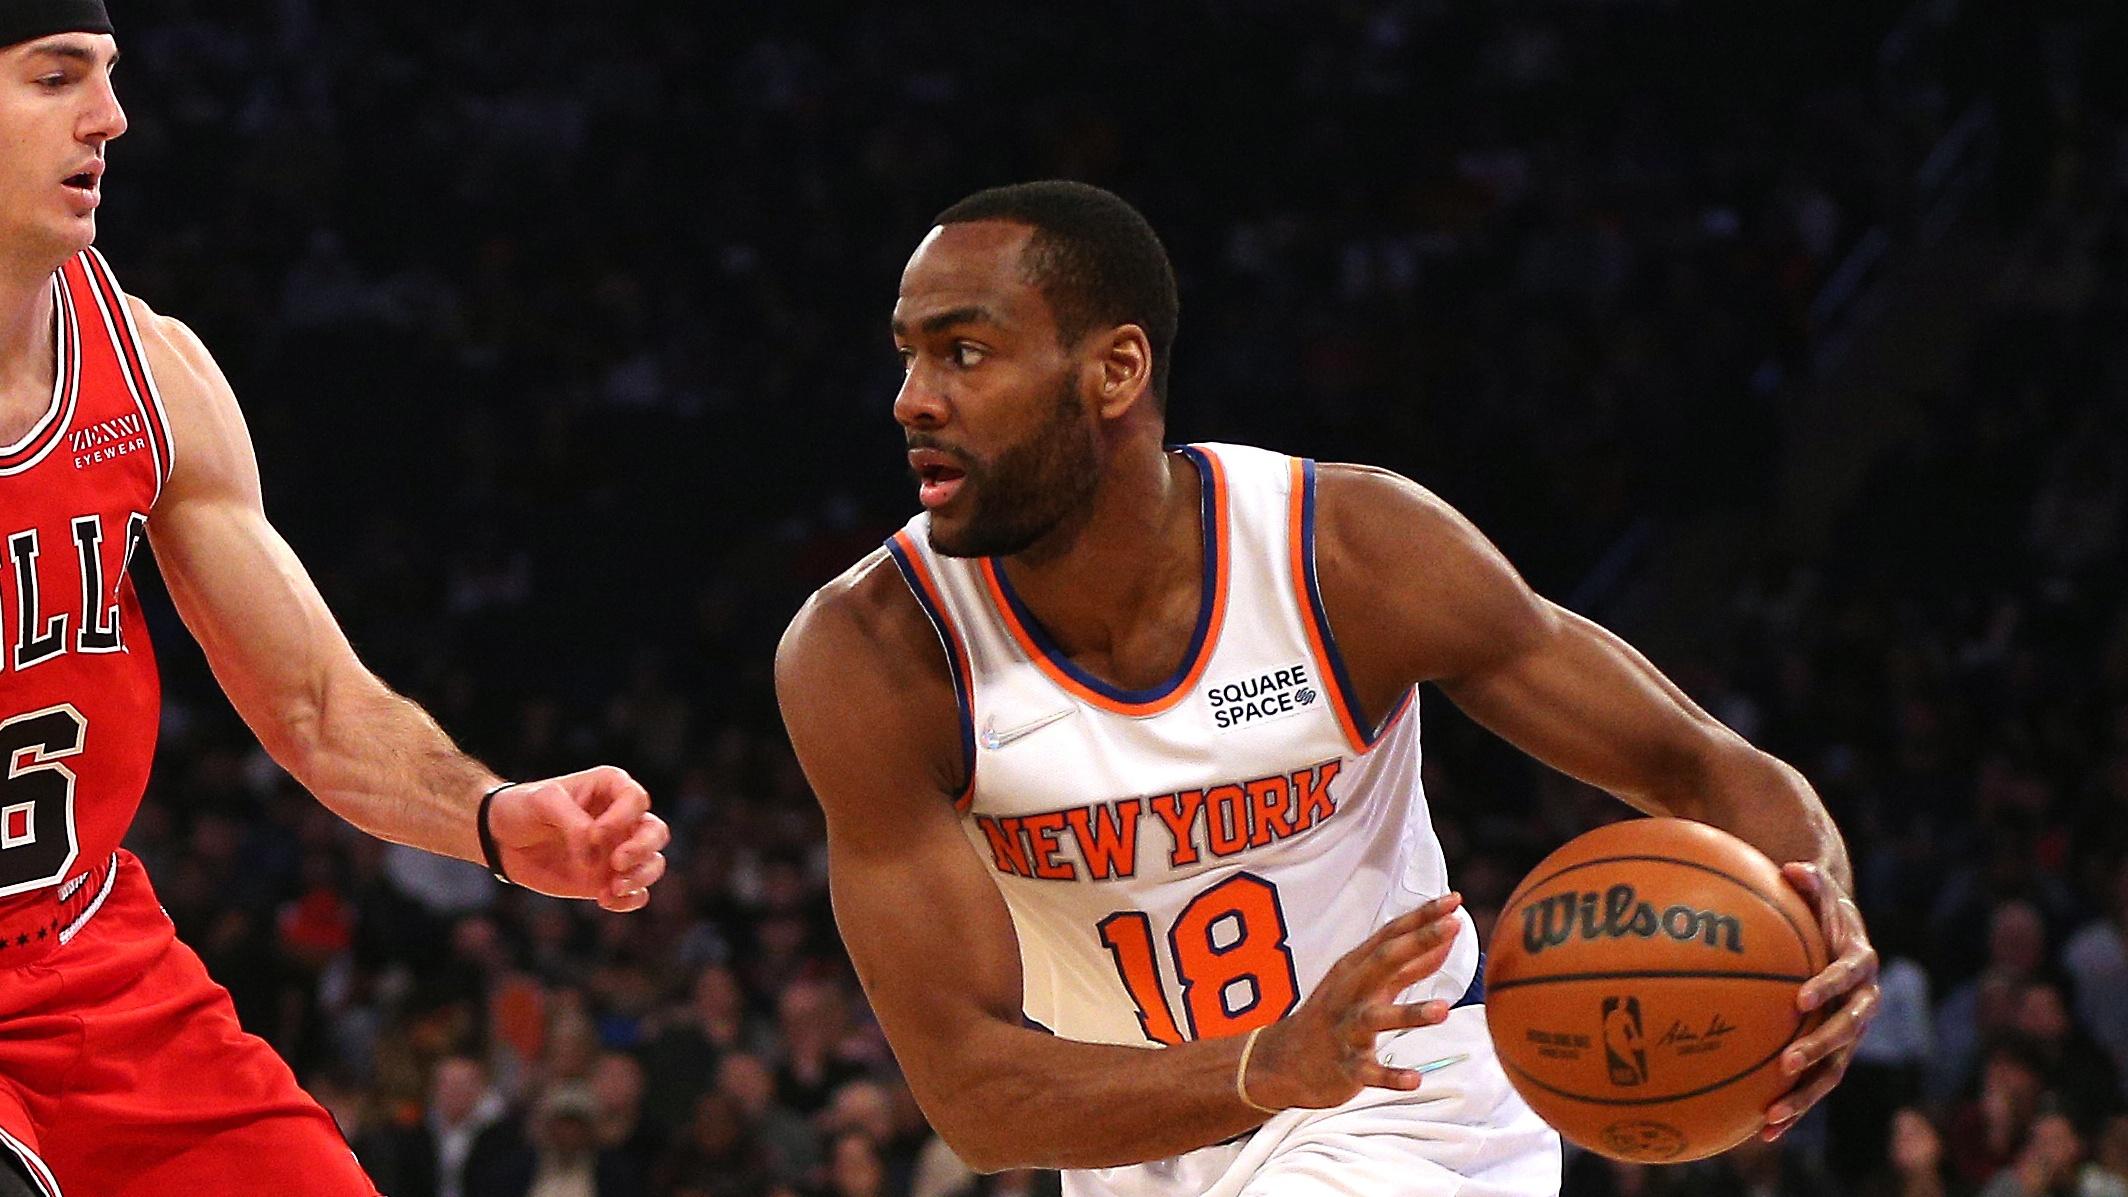 Mar 28, 2022; New York, New York, USA; New York Knicks guard Alec Burks (18) dribbles the ball against Chicago Bulls guard Alex Caruso (6) during the first half at Madison Square Garden. Mandatory Credit: Andy Marlin-USA TODAY Sports / © Andy Marlin-USA TODAY Sports